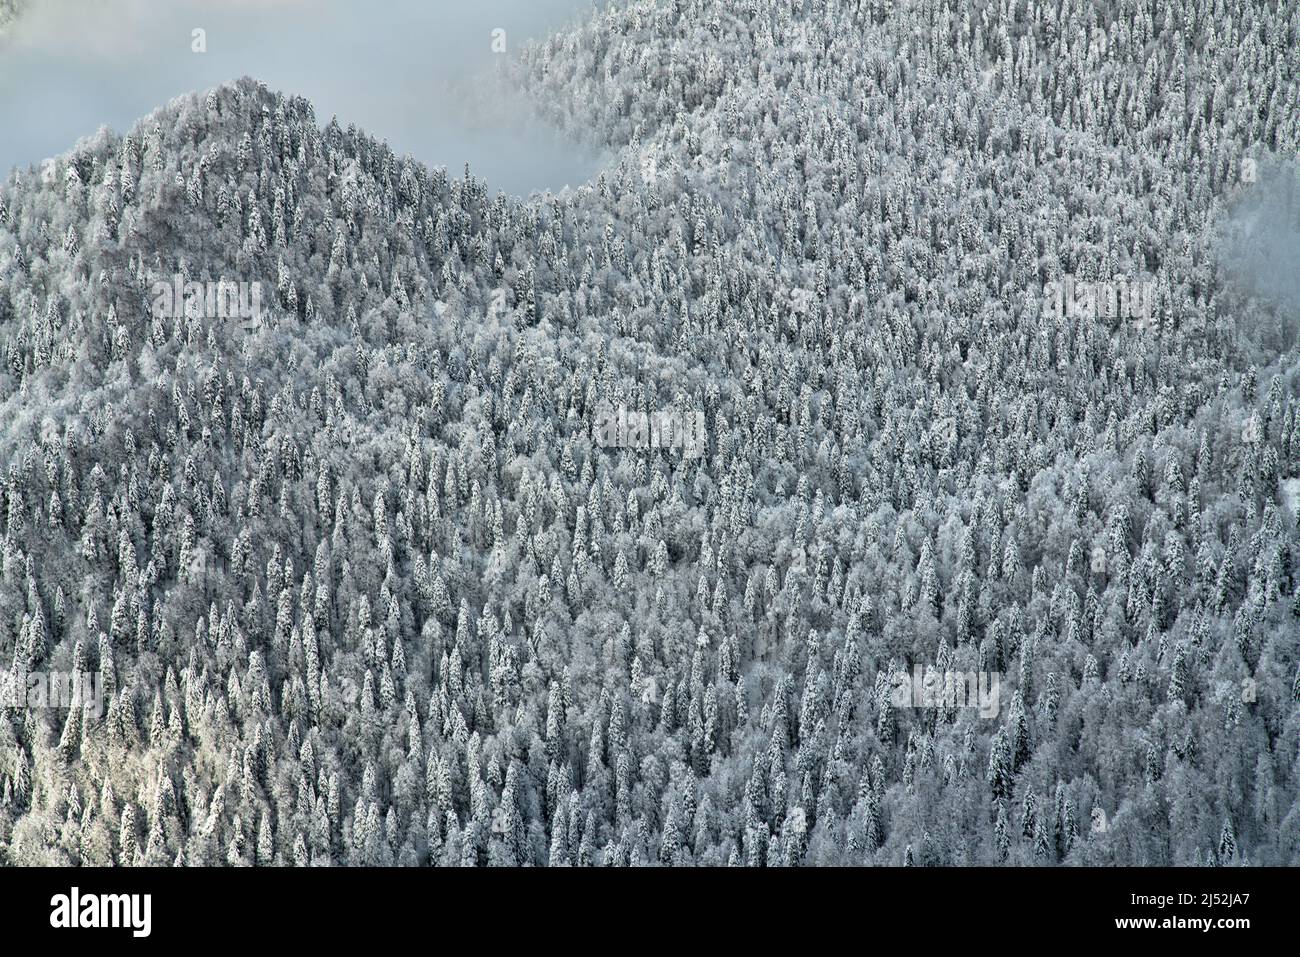 Extensive, thick stand of trees spruce forests in the winter mountains at an altitude of 2000 meters a.s.l. Cloud-forest belt. Oriental spruce (Picea Stock Photo